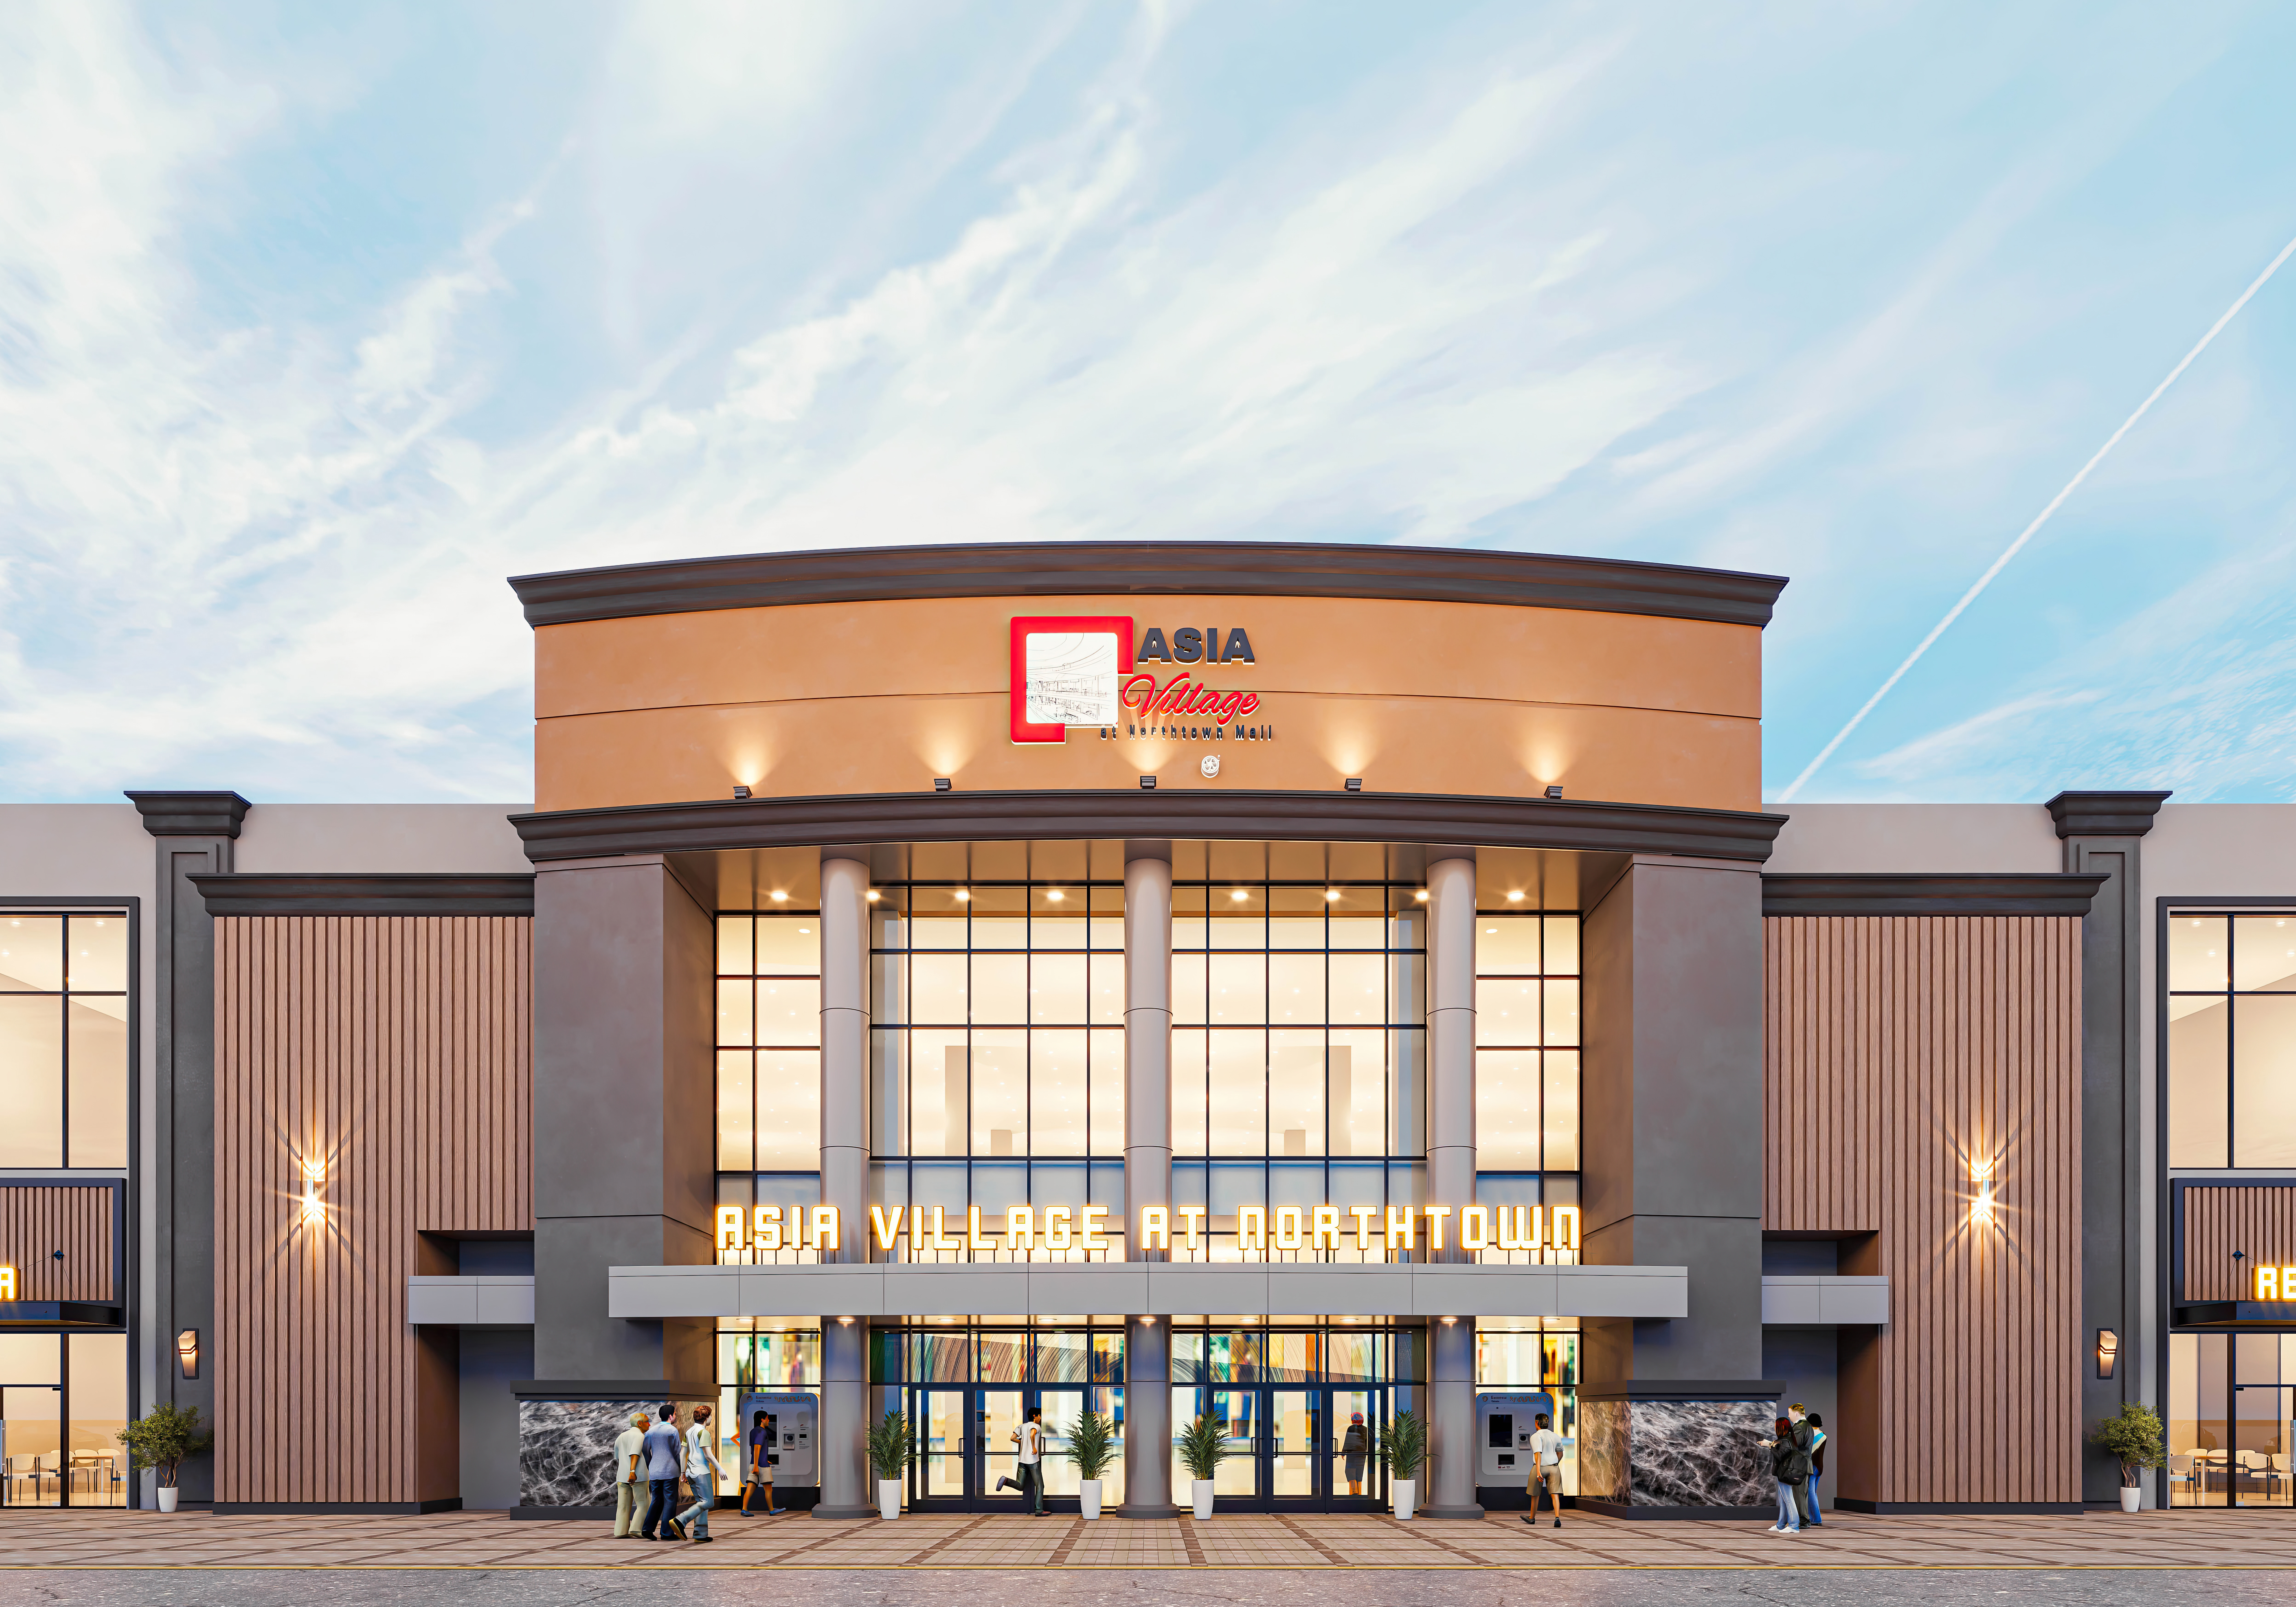 An animated rendering of a shopping mall with tall multi-story windows, people gathering outside on the side walk, and red and black lettering that reads “Asia Village.”